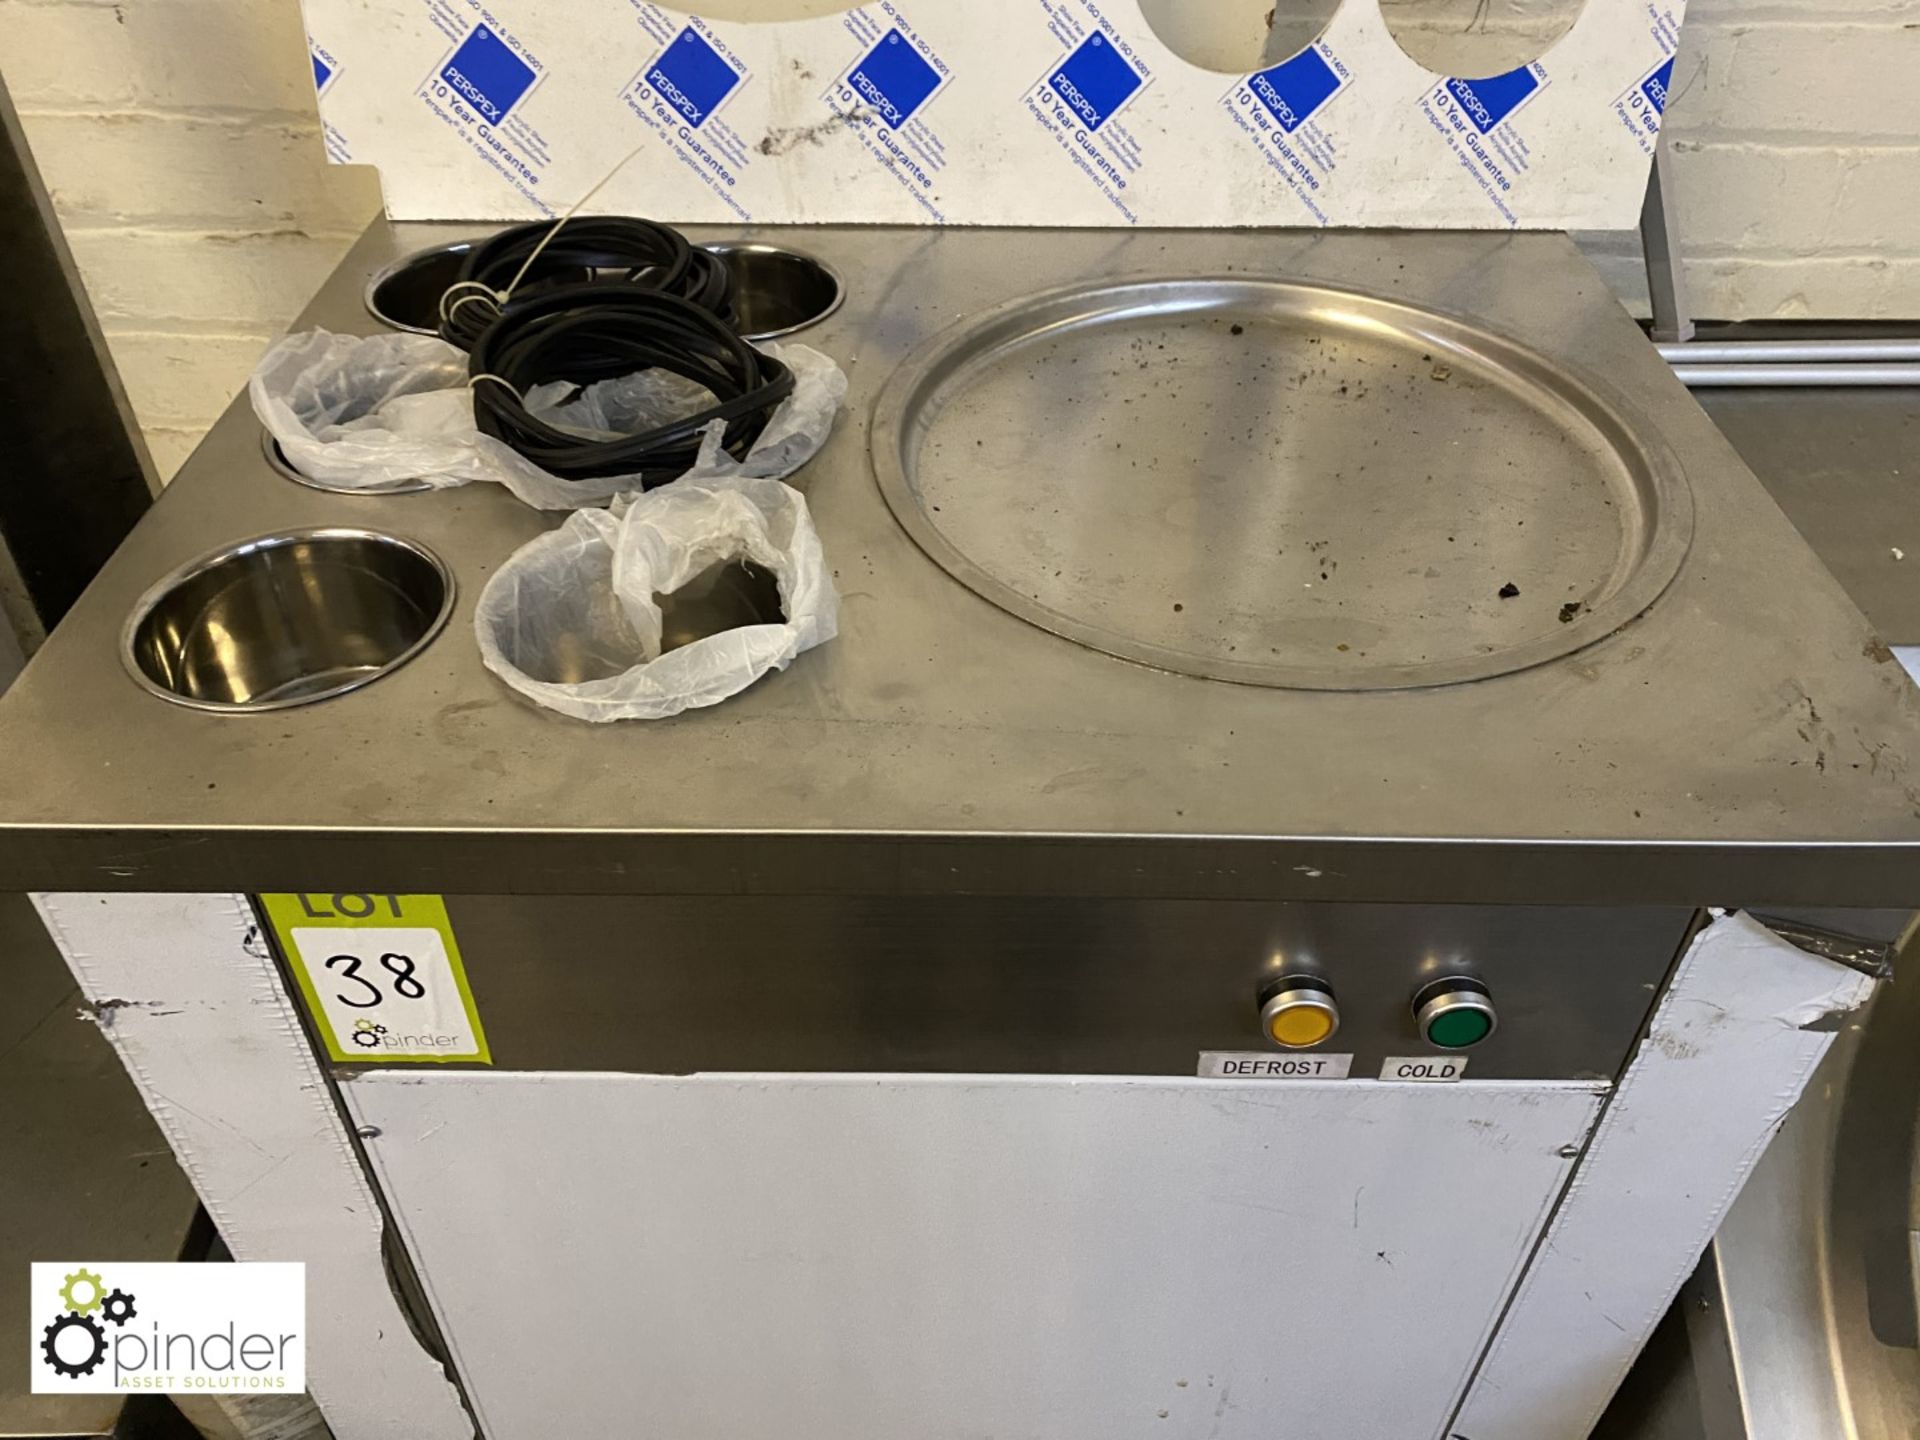 Stainless steel CBJX-1D6C fried Ice Cream Machine, 240volts, unused - Image 2 of 2